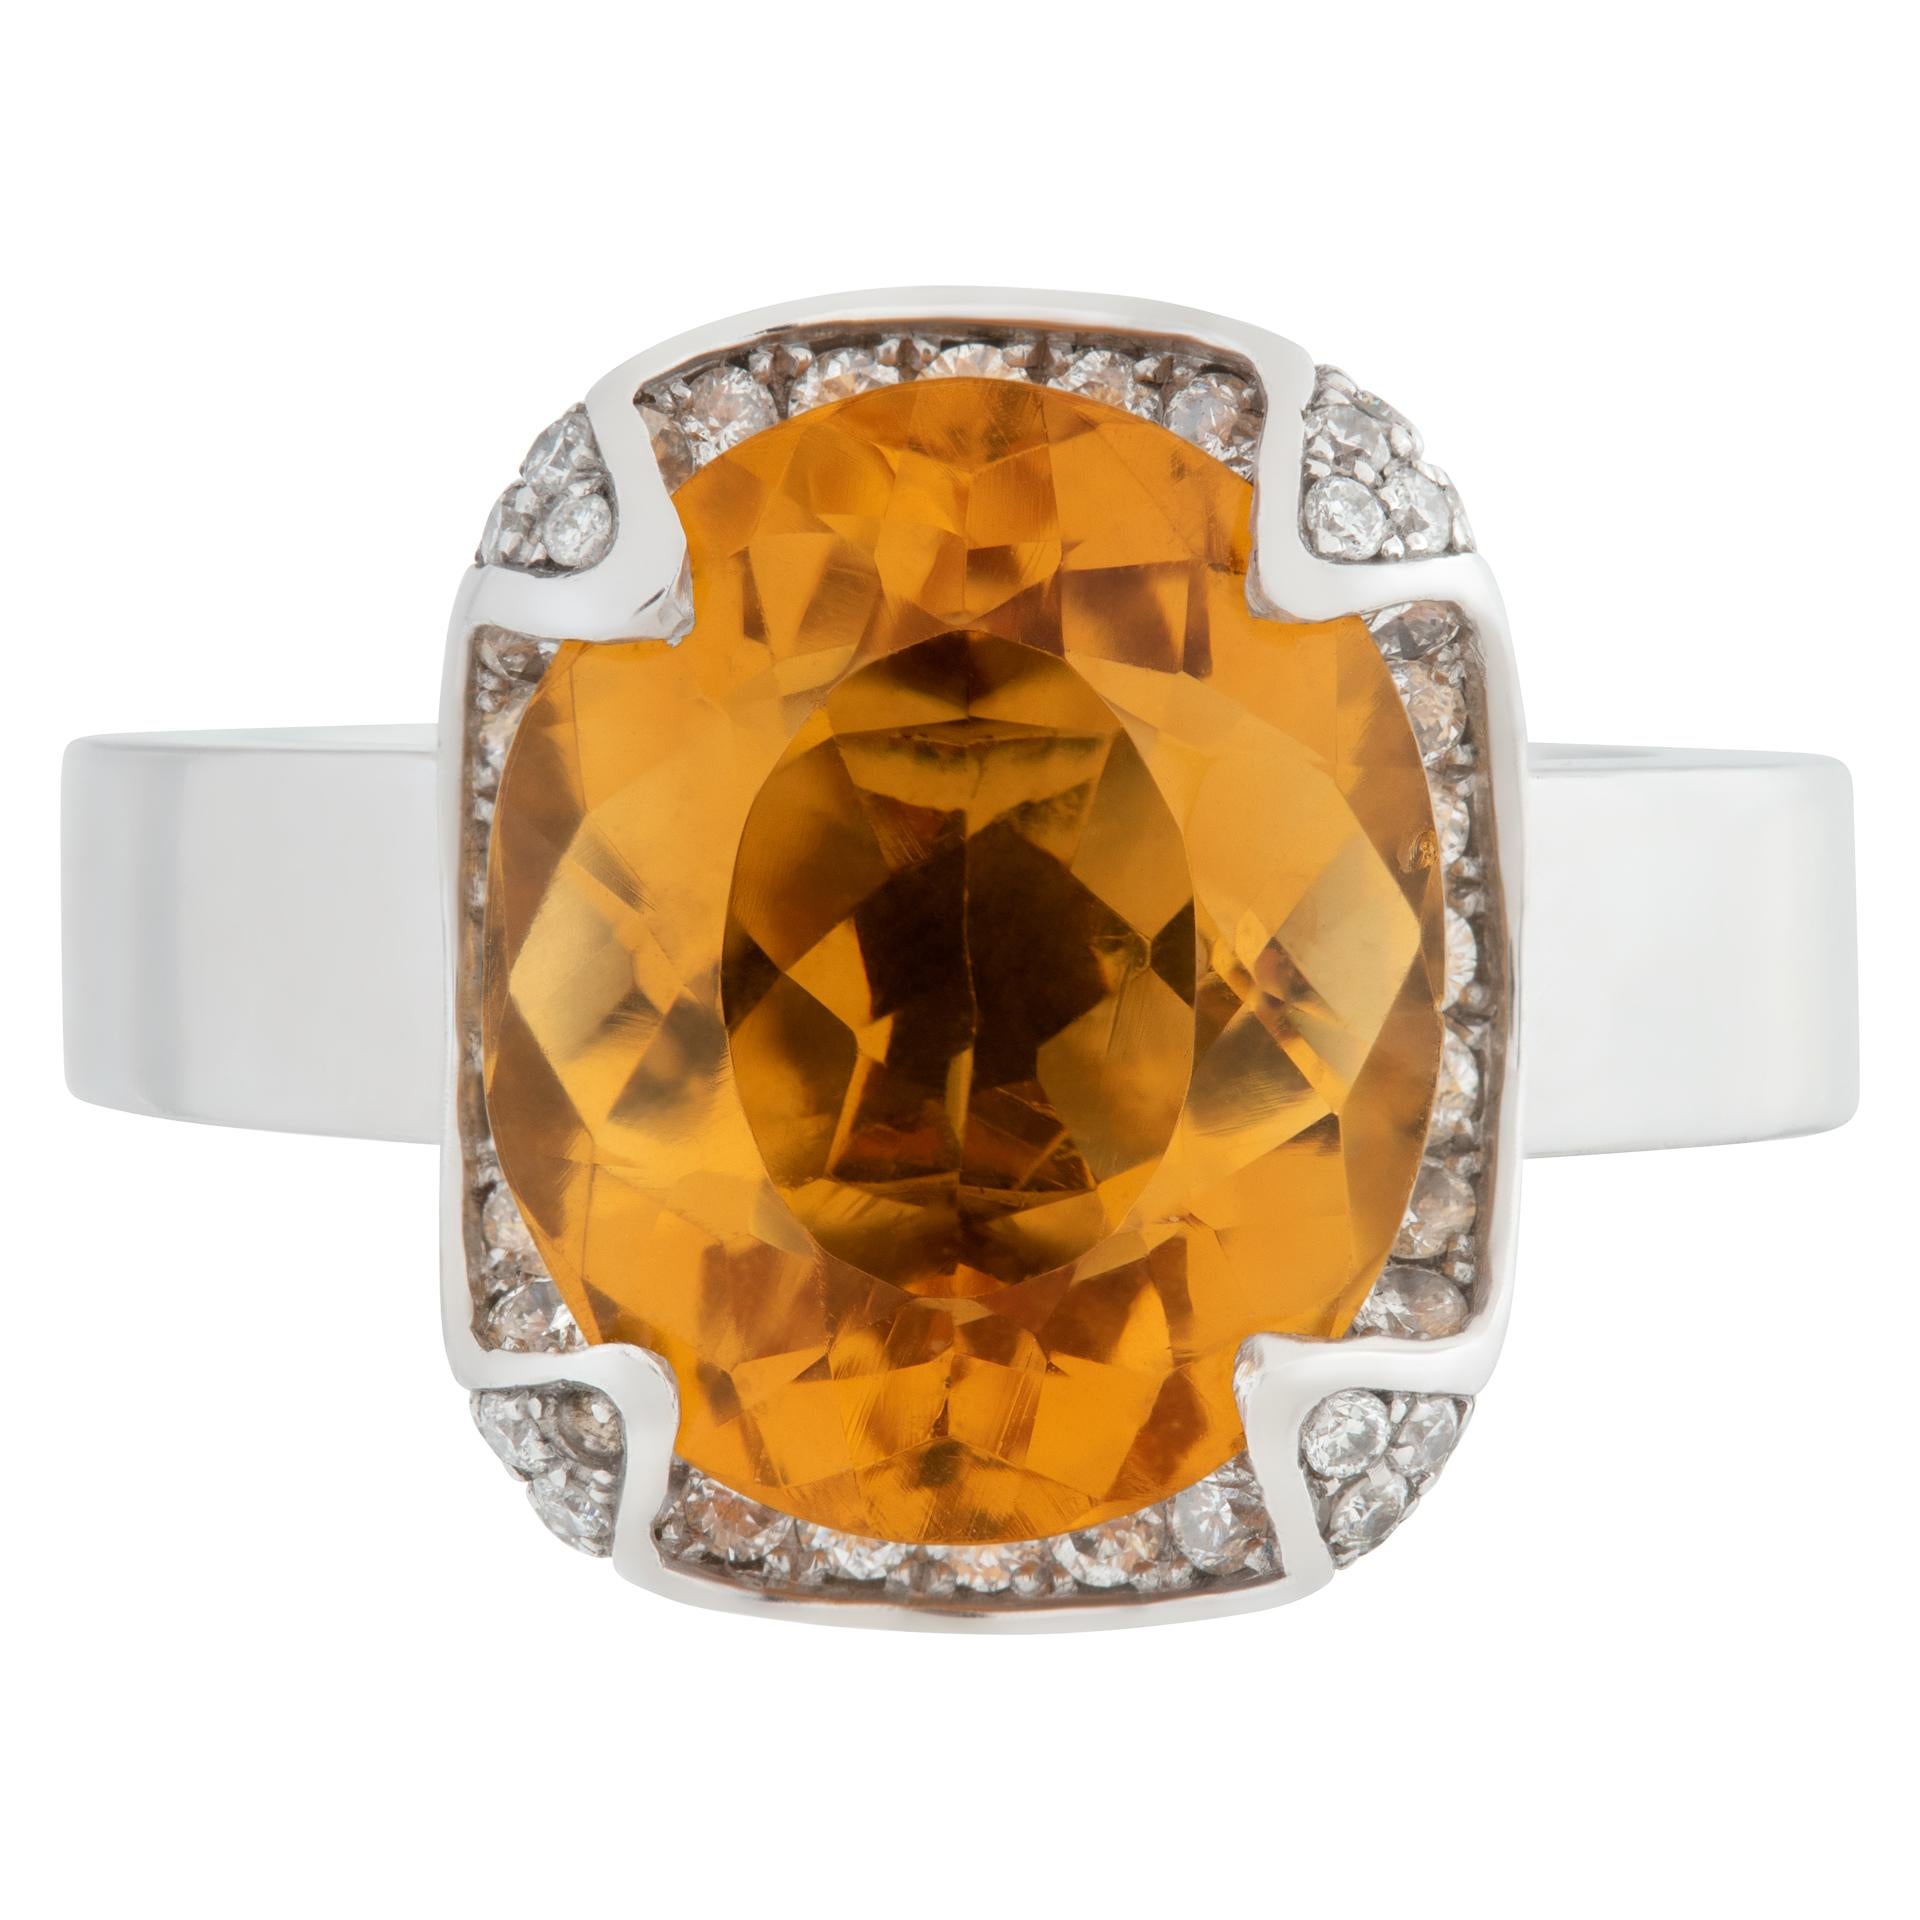 Outstanding oval cut orange topaz ring with diamond claw setting in 18k white gold. Size 5.5. Top of ring measures 12mm x 14.5mm.This Diamond ring is currently size 5.5 and some items can be sized up or down, please ask! It weighs 9.3 pennyweights